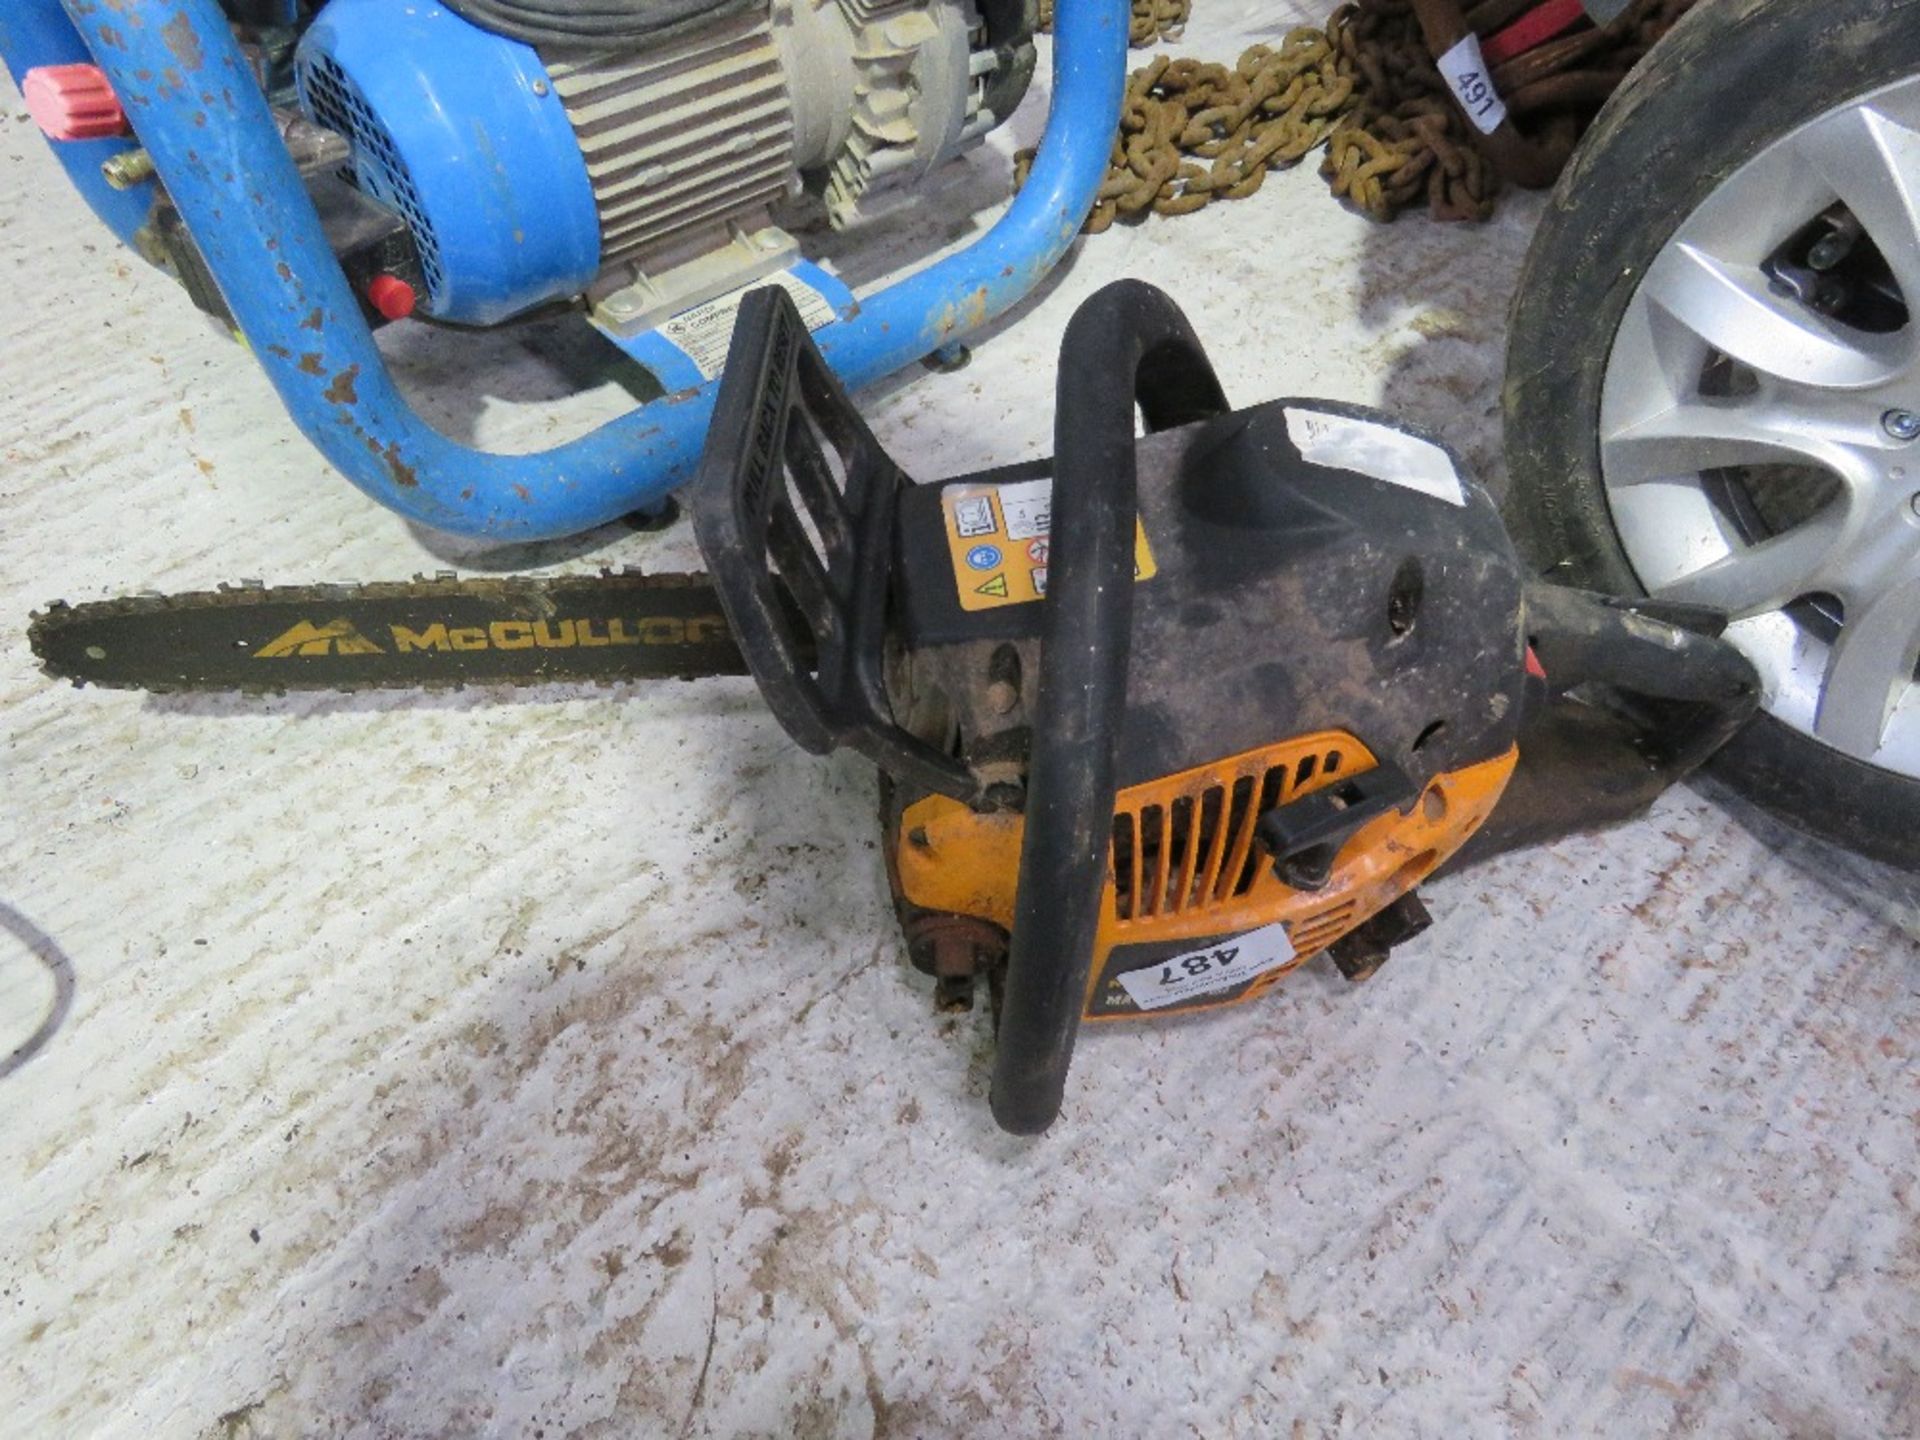 McCULLOCH PETROL ENGINED CHAINSAW. - Image 2 of 3